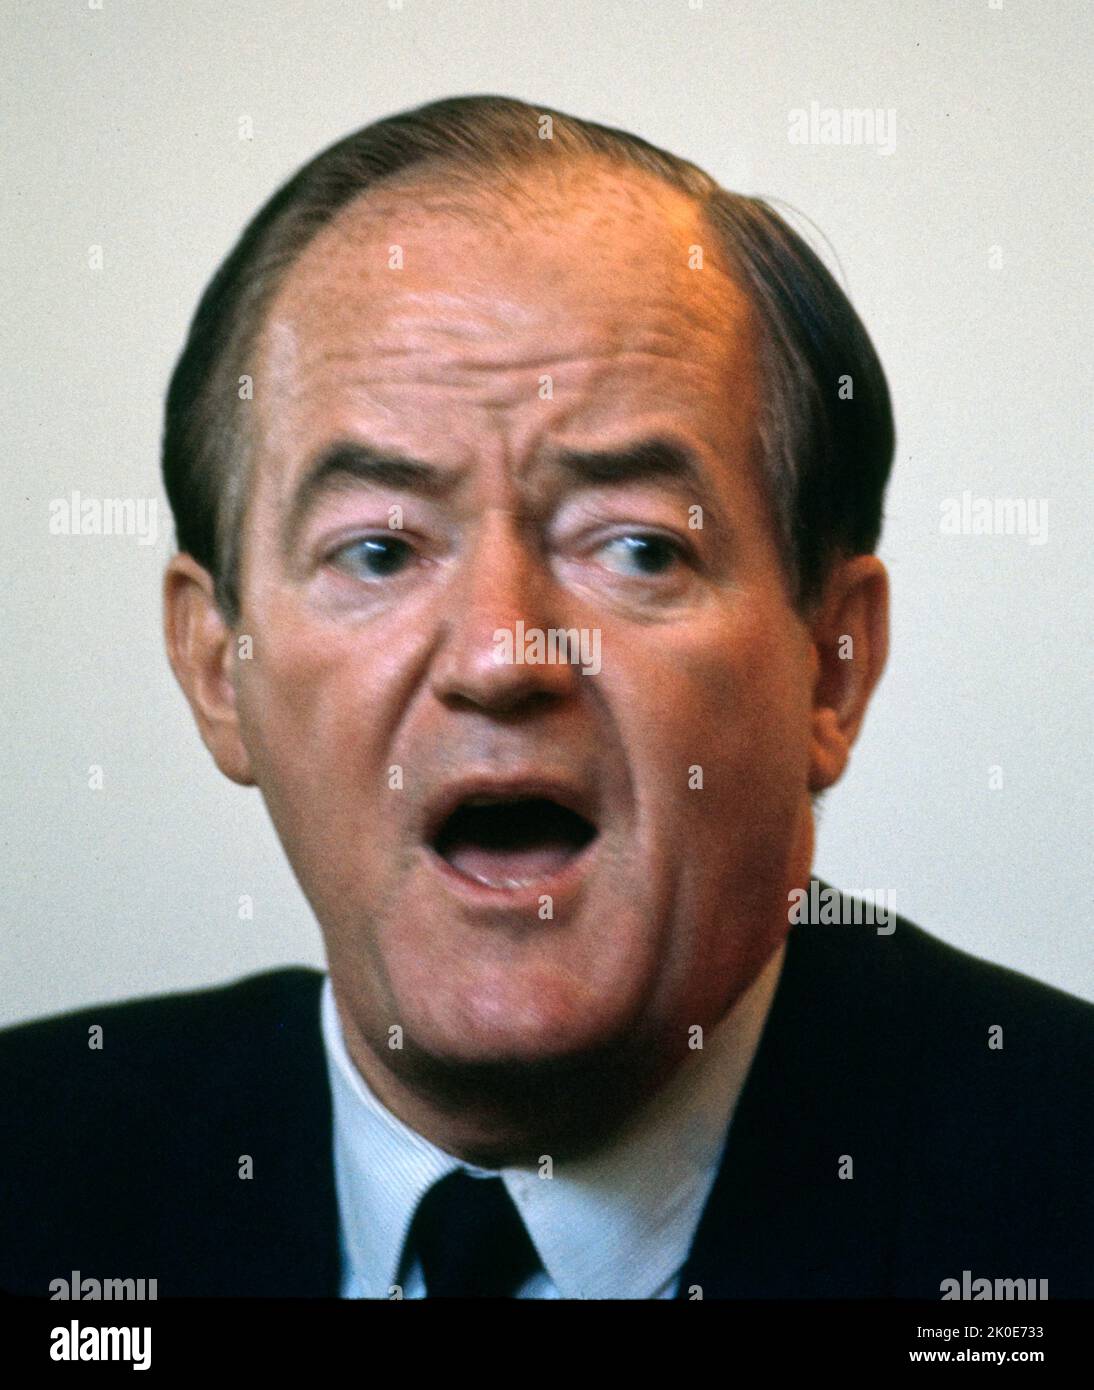 Hubert Humphrey (1911 - 1978) American politician who served as the 38th vice president of the United States from 1965 to 1969. He twice served in the United States Senate, representing Minnesota from 1949 to 1964 and 1971 to 1978. The Democratic Party nominated him in the 1968 presidential election. He lost the election to Republican nominee Richard Nixon. Stock Photo